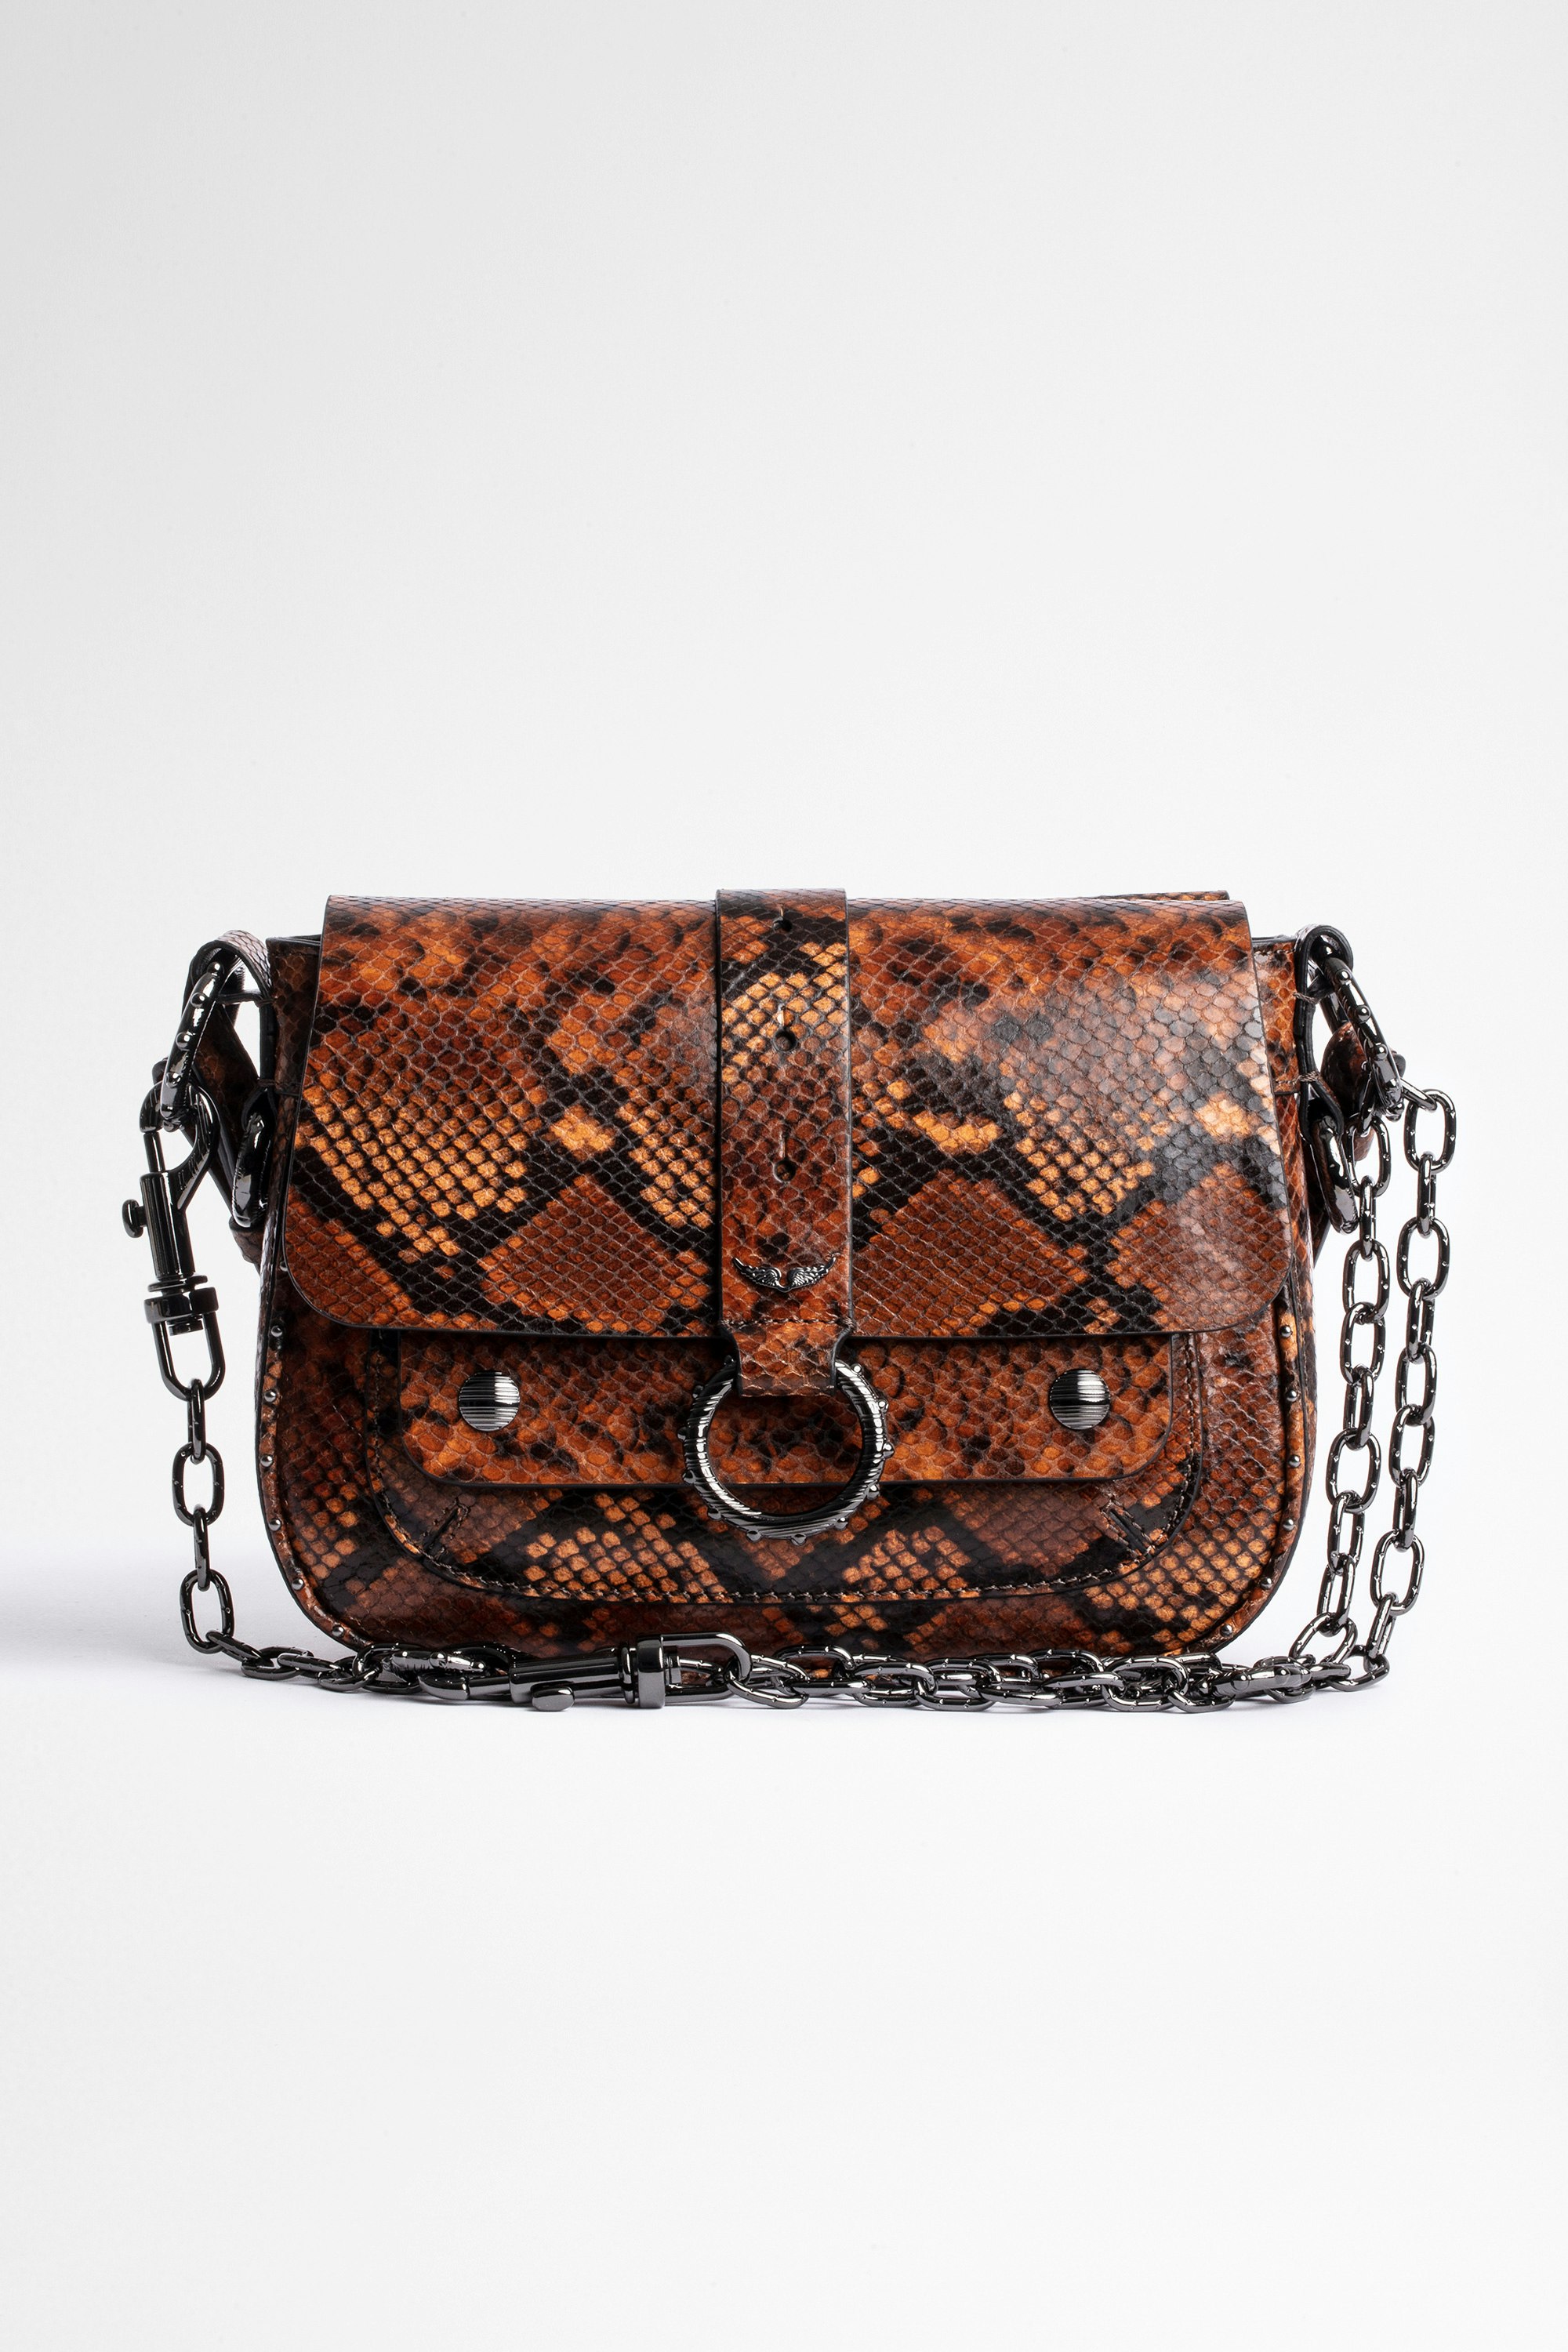 Kate bag Women's snakeskin-effect brown leather bag. Buying this product, you support a responsible leather production through Leather Working Group.